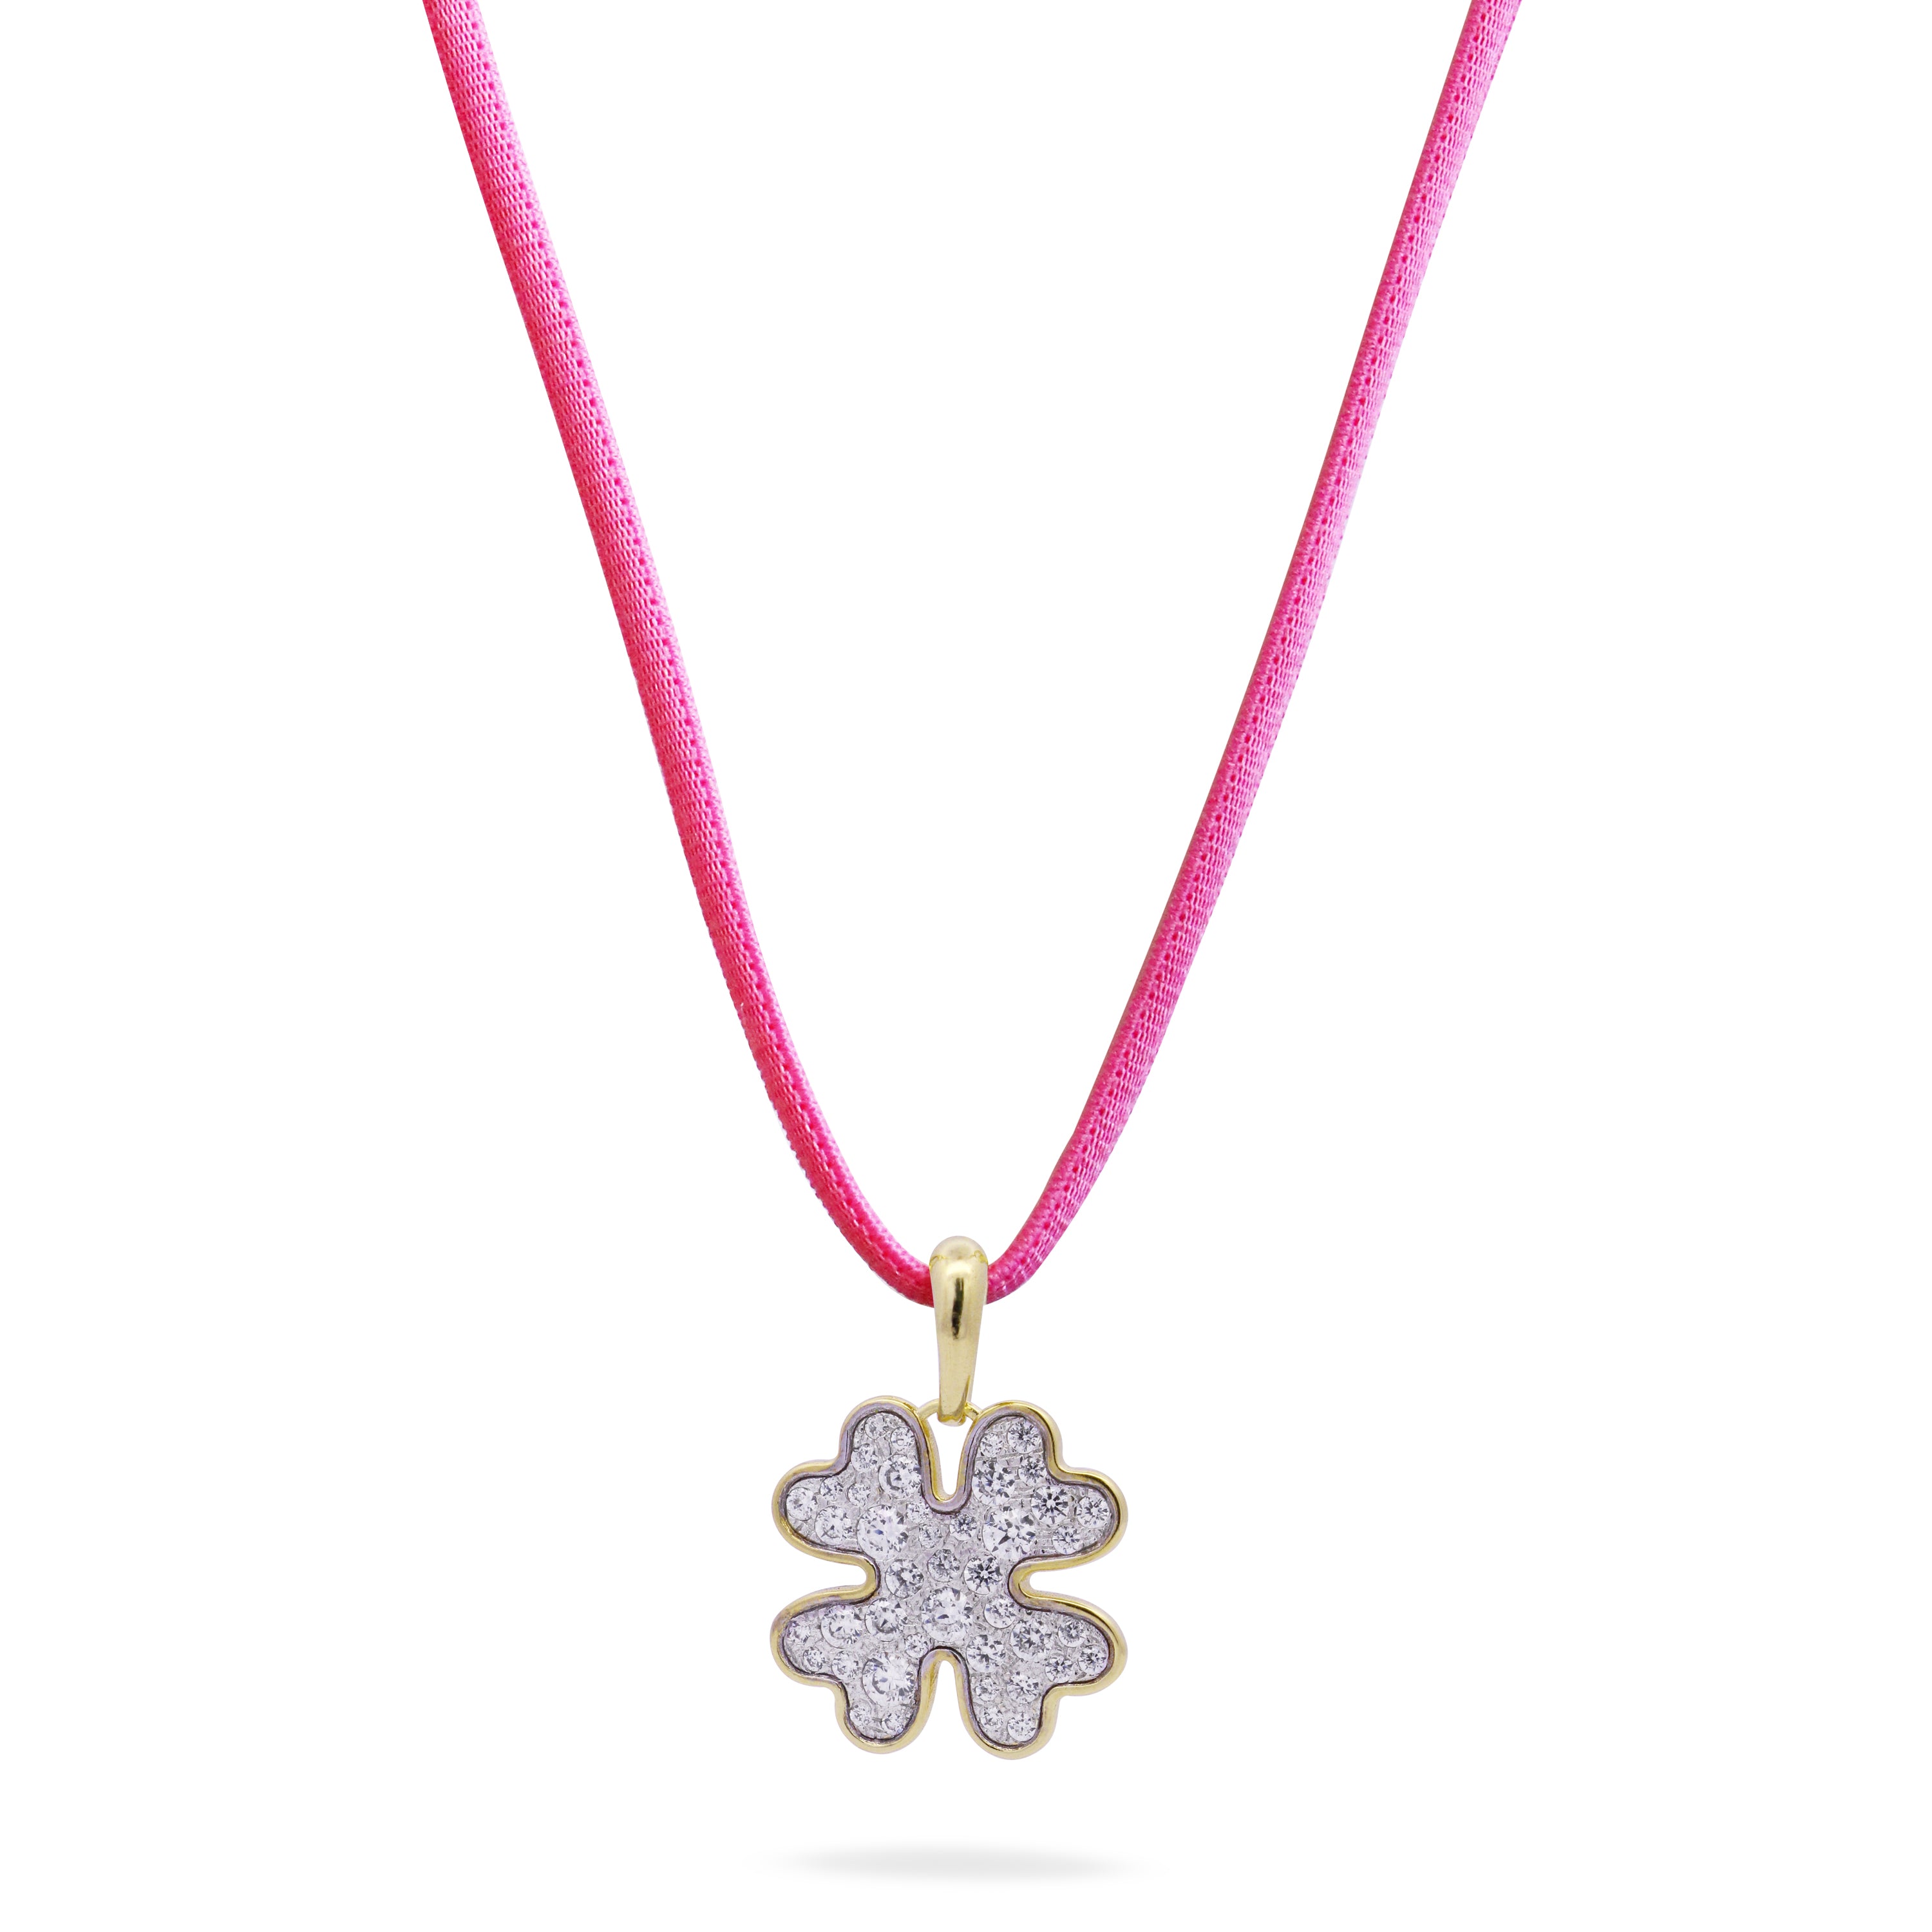 Oversized pave four-leaf clover pendant with pink choker - STARDUST TEN